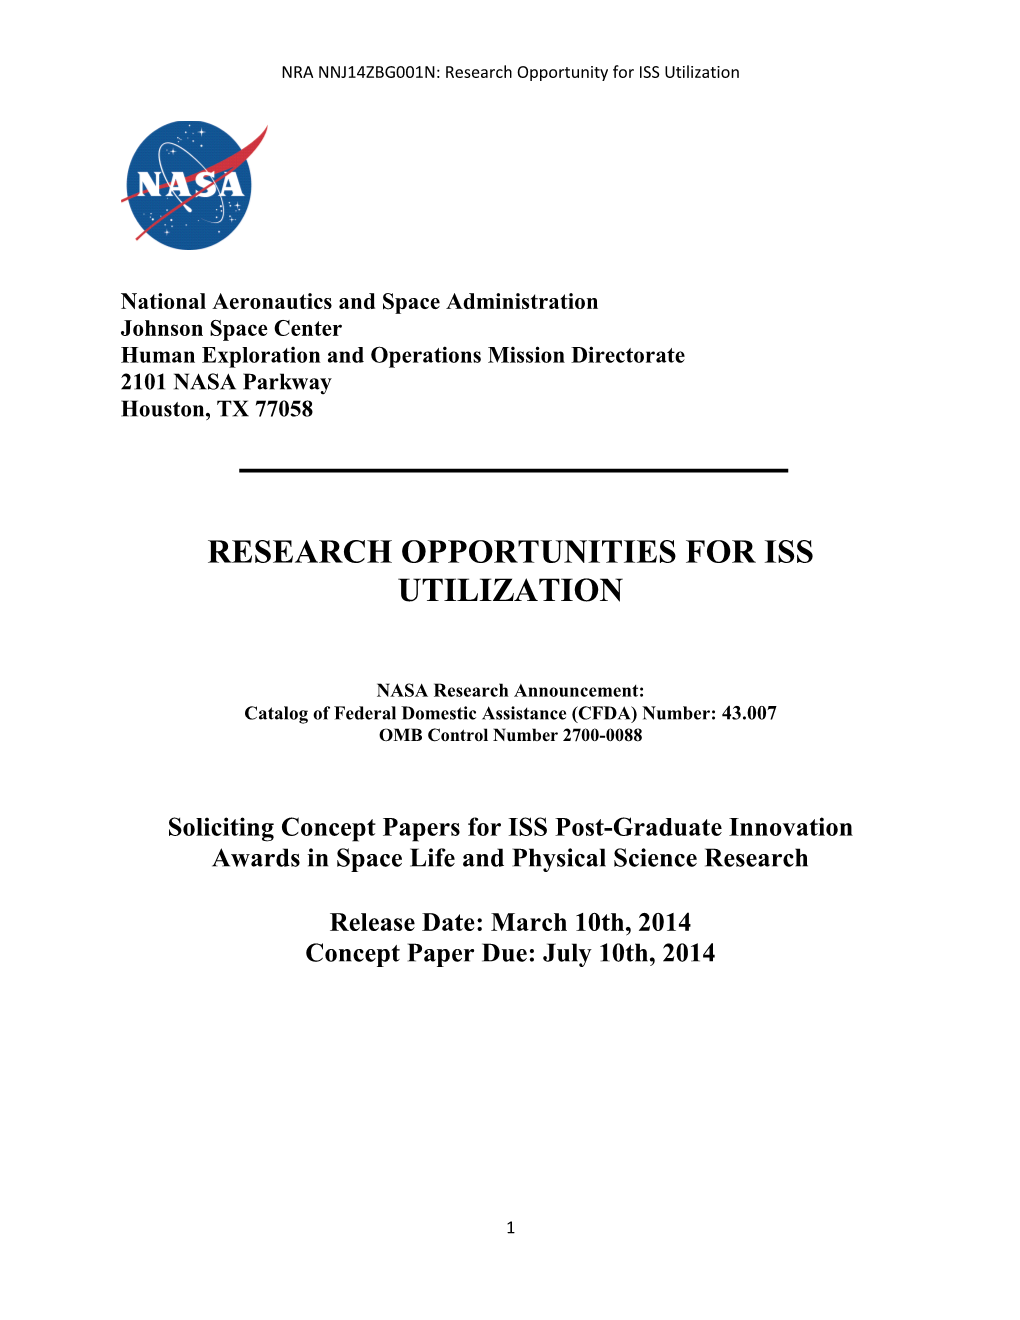 Research Opportunities for Iss Utilization